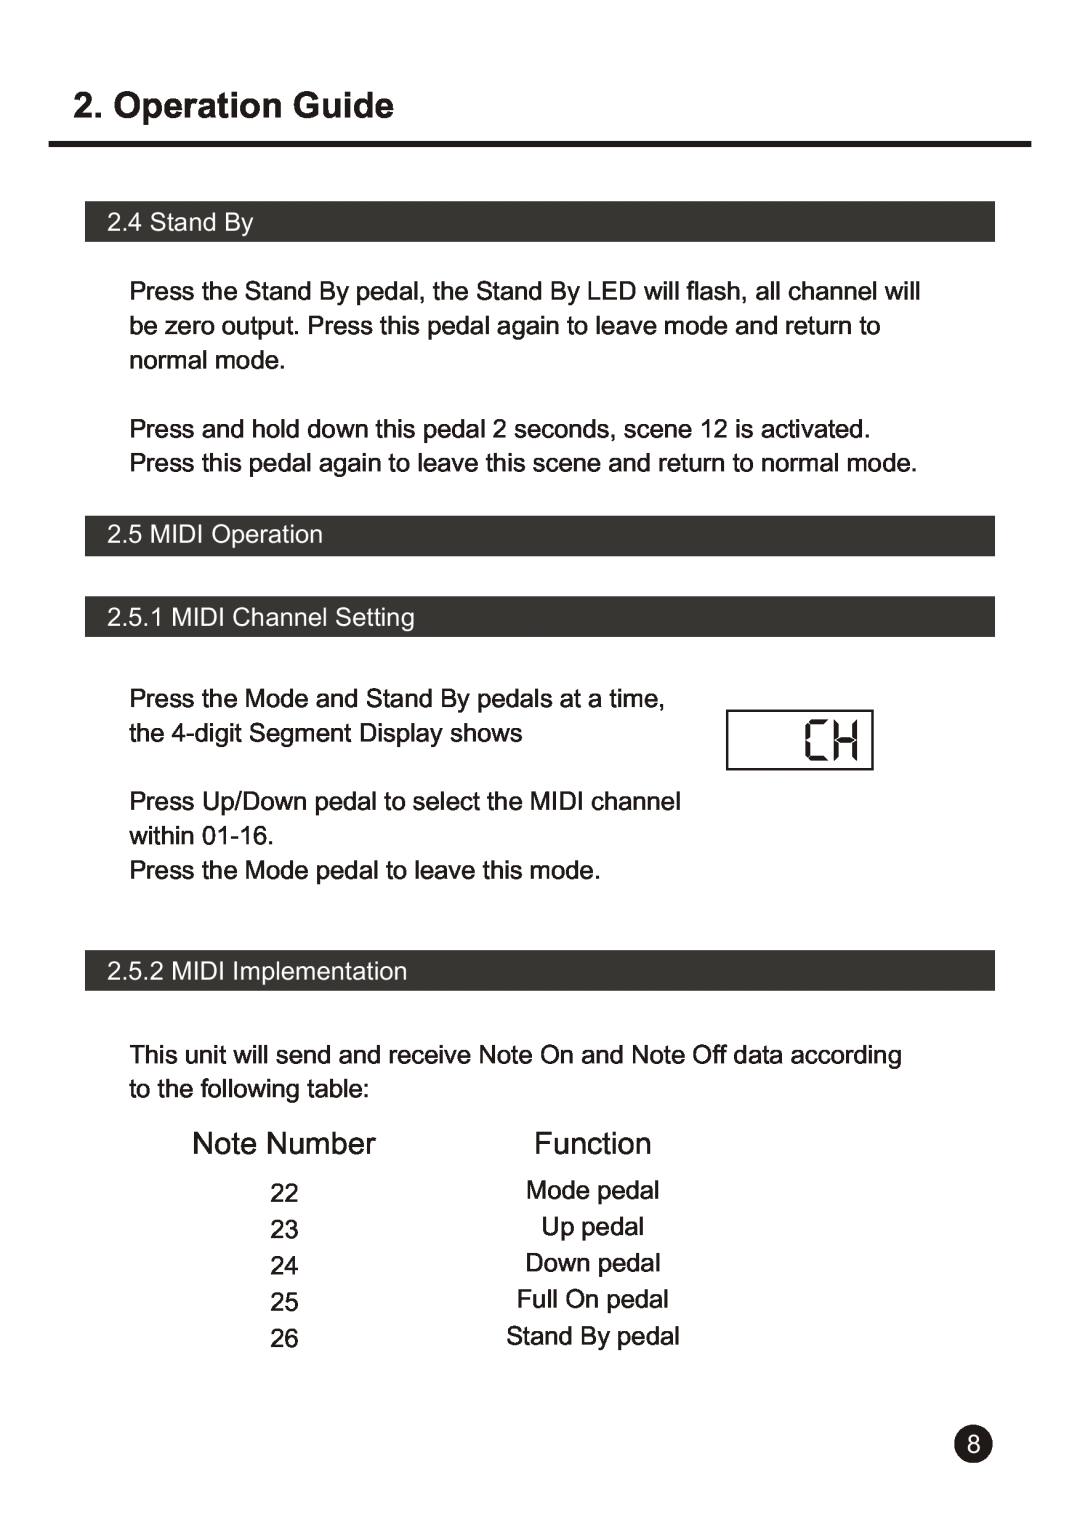 American DJ FC 400 user manual Note Number, Function, Operation Guide, Stand By, MIDI Operation 2.5.1 MIDI Channel Setting 